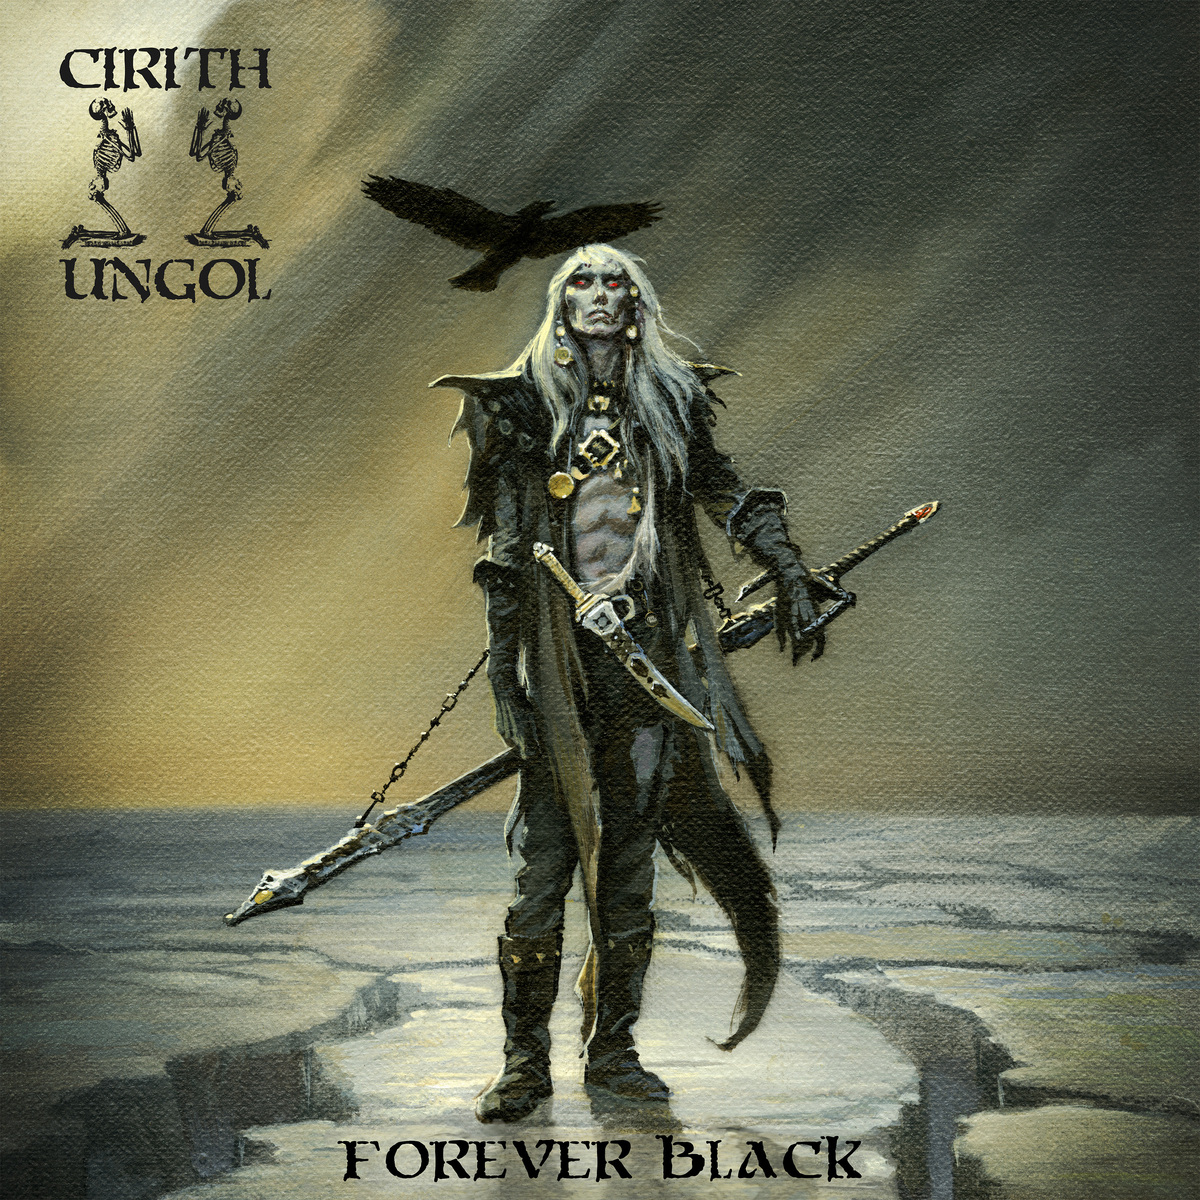 EUsze1tUMAA6983 Lance Hall chats with @CirithU Ungol bassist, Jarvis Leatherby; discussing the upcoming record, #ForeverBlack and more! http://youtube.com/watch?v=qrGCqG6beZo …pic.twitter.com/qPEp9AyjYh | Cirith Ungol Online